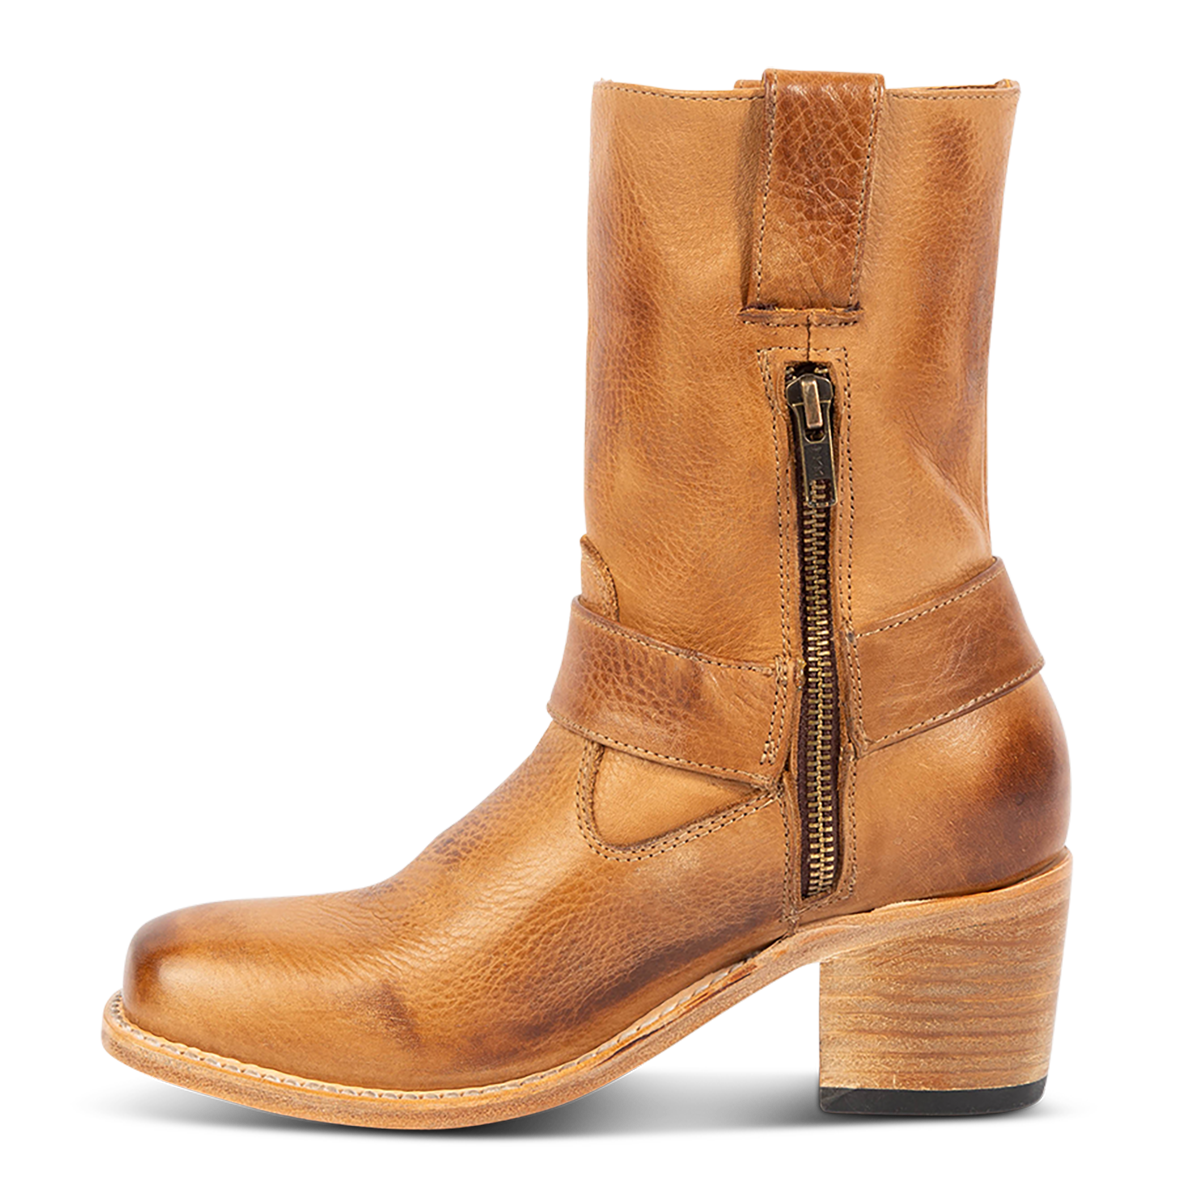 Inside view showing FREEBIRD women's Darcy wheat boot with leather pull straps, inside zip closure, and square toe